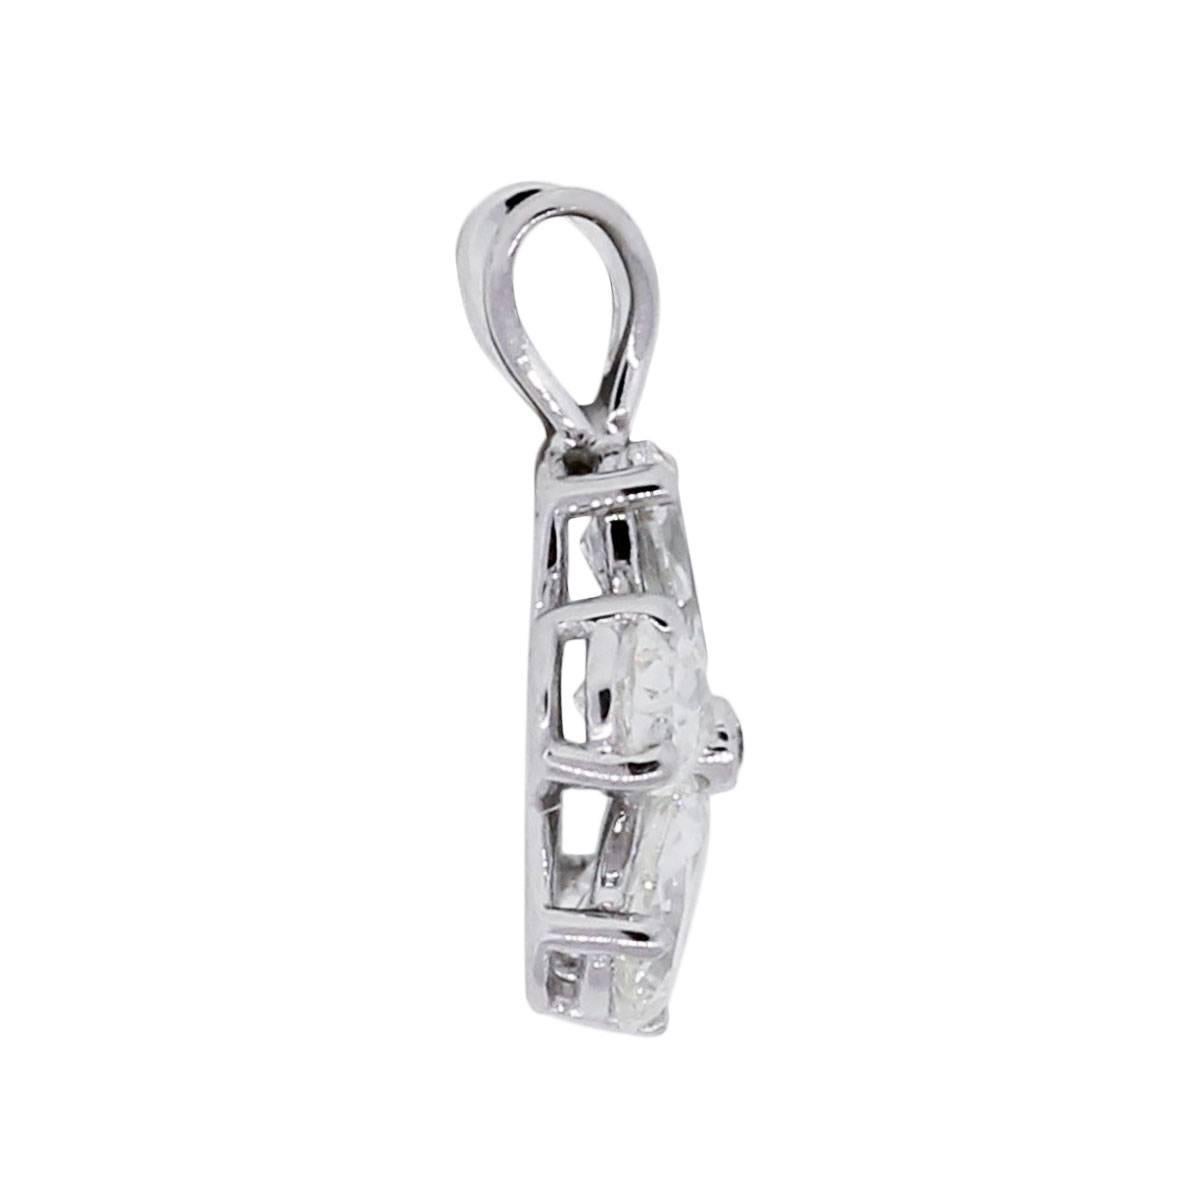 Material: 14k white gold
Diamond Details: Approximately 0.99ctw of pear shape and round brilliant diamonds. Diamonds are G/H in color and SI in clarity
Pendant Dimensions: 0.64″ x 0.20″ x 0.46″
Total Weight: 1g (0.6dwt)
Additional Details: Comes